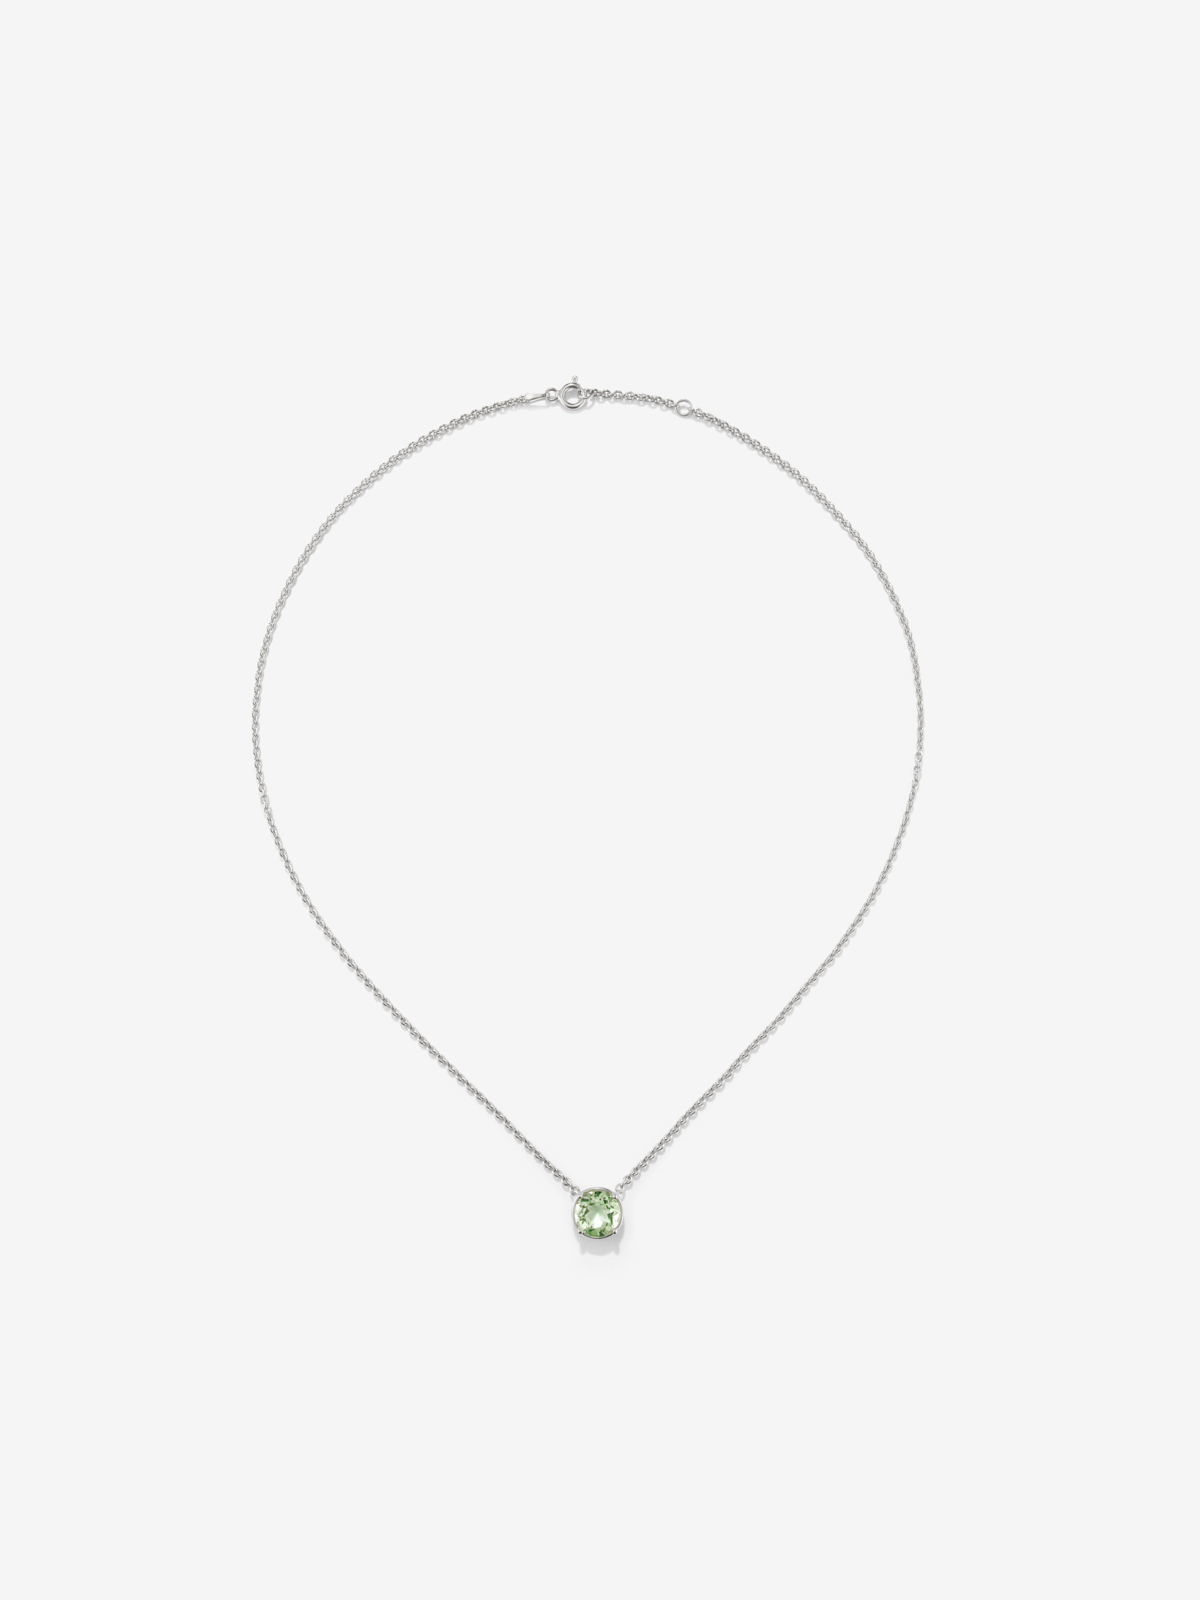 925 Silver chain pendant with green amethyst